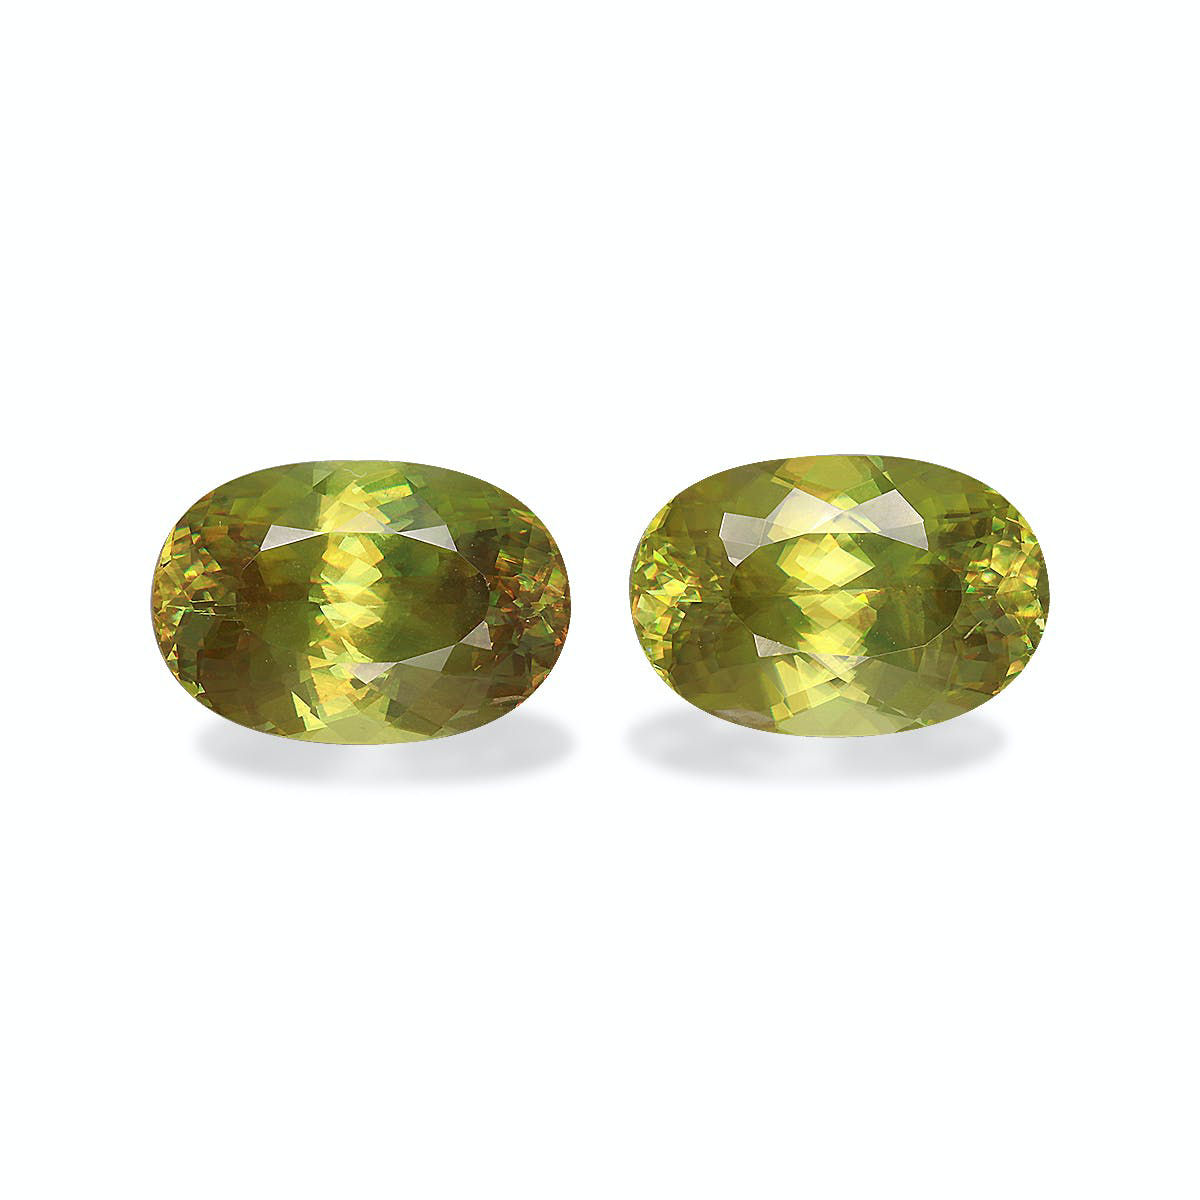 Picture of Lime Green Sphene 6.01ct - Pair (SH0678)